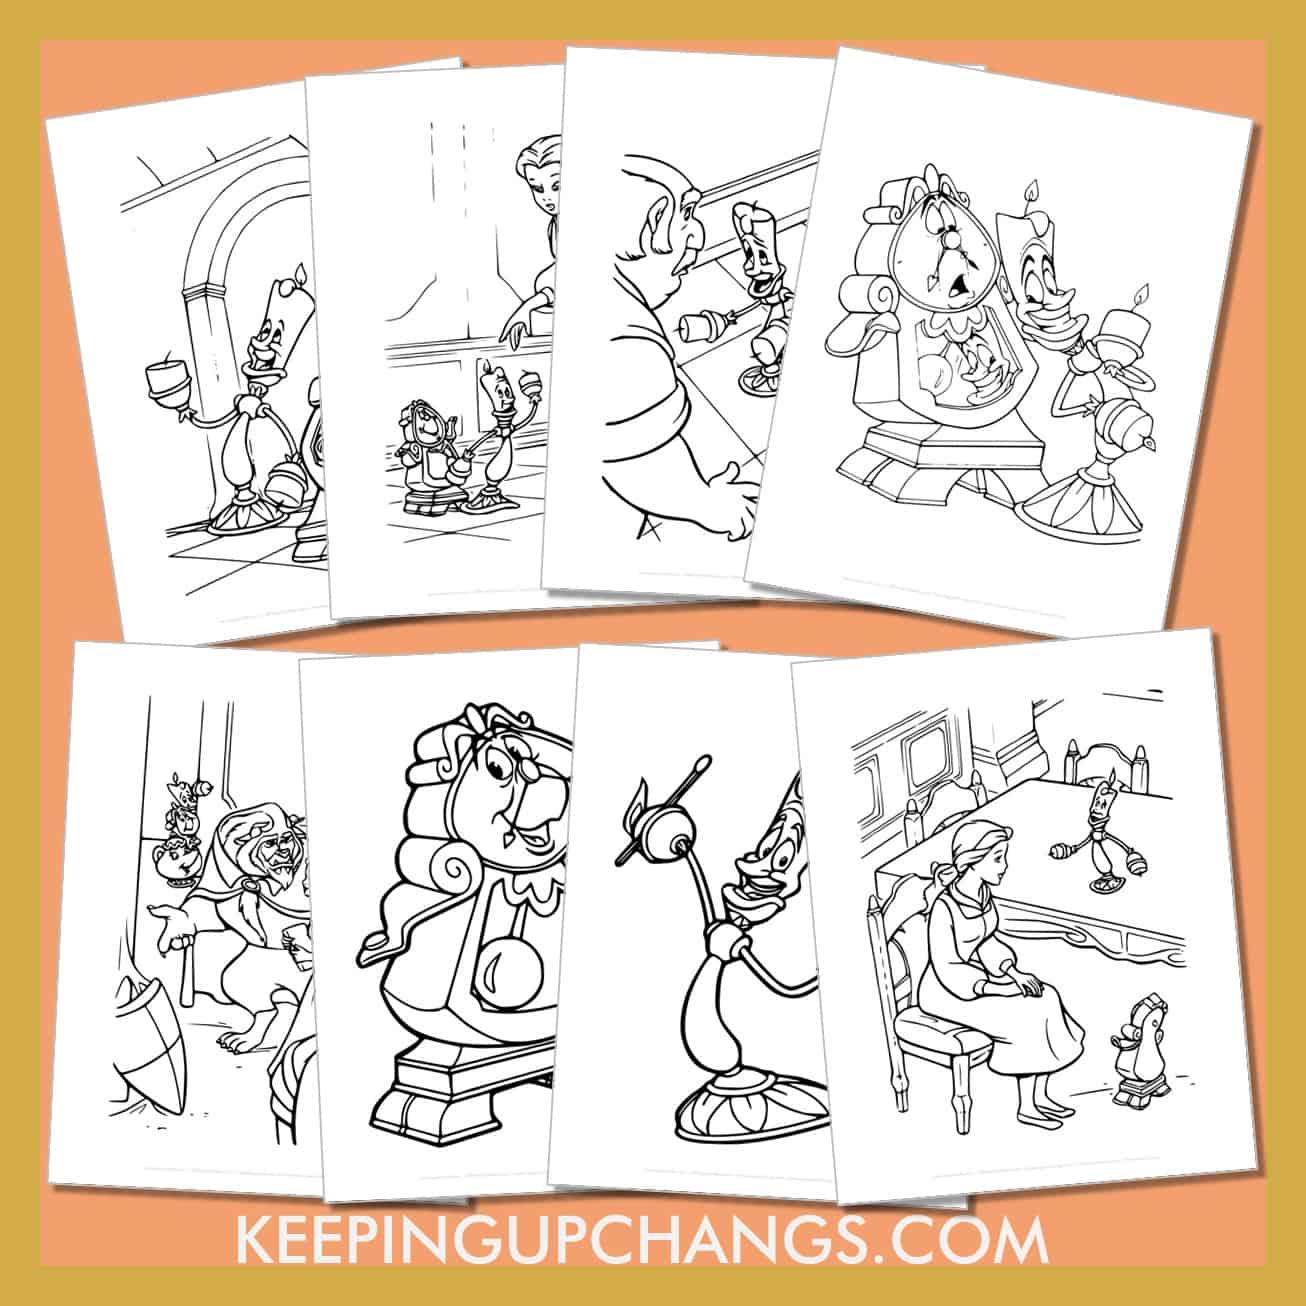 free cogsworth, lumiere pictures to color for toddlers, kids, adults.